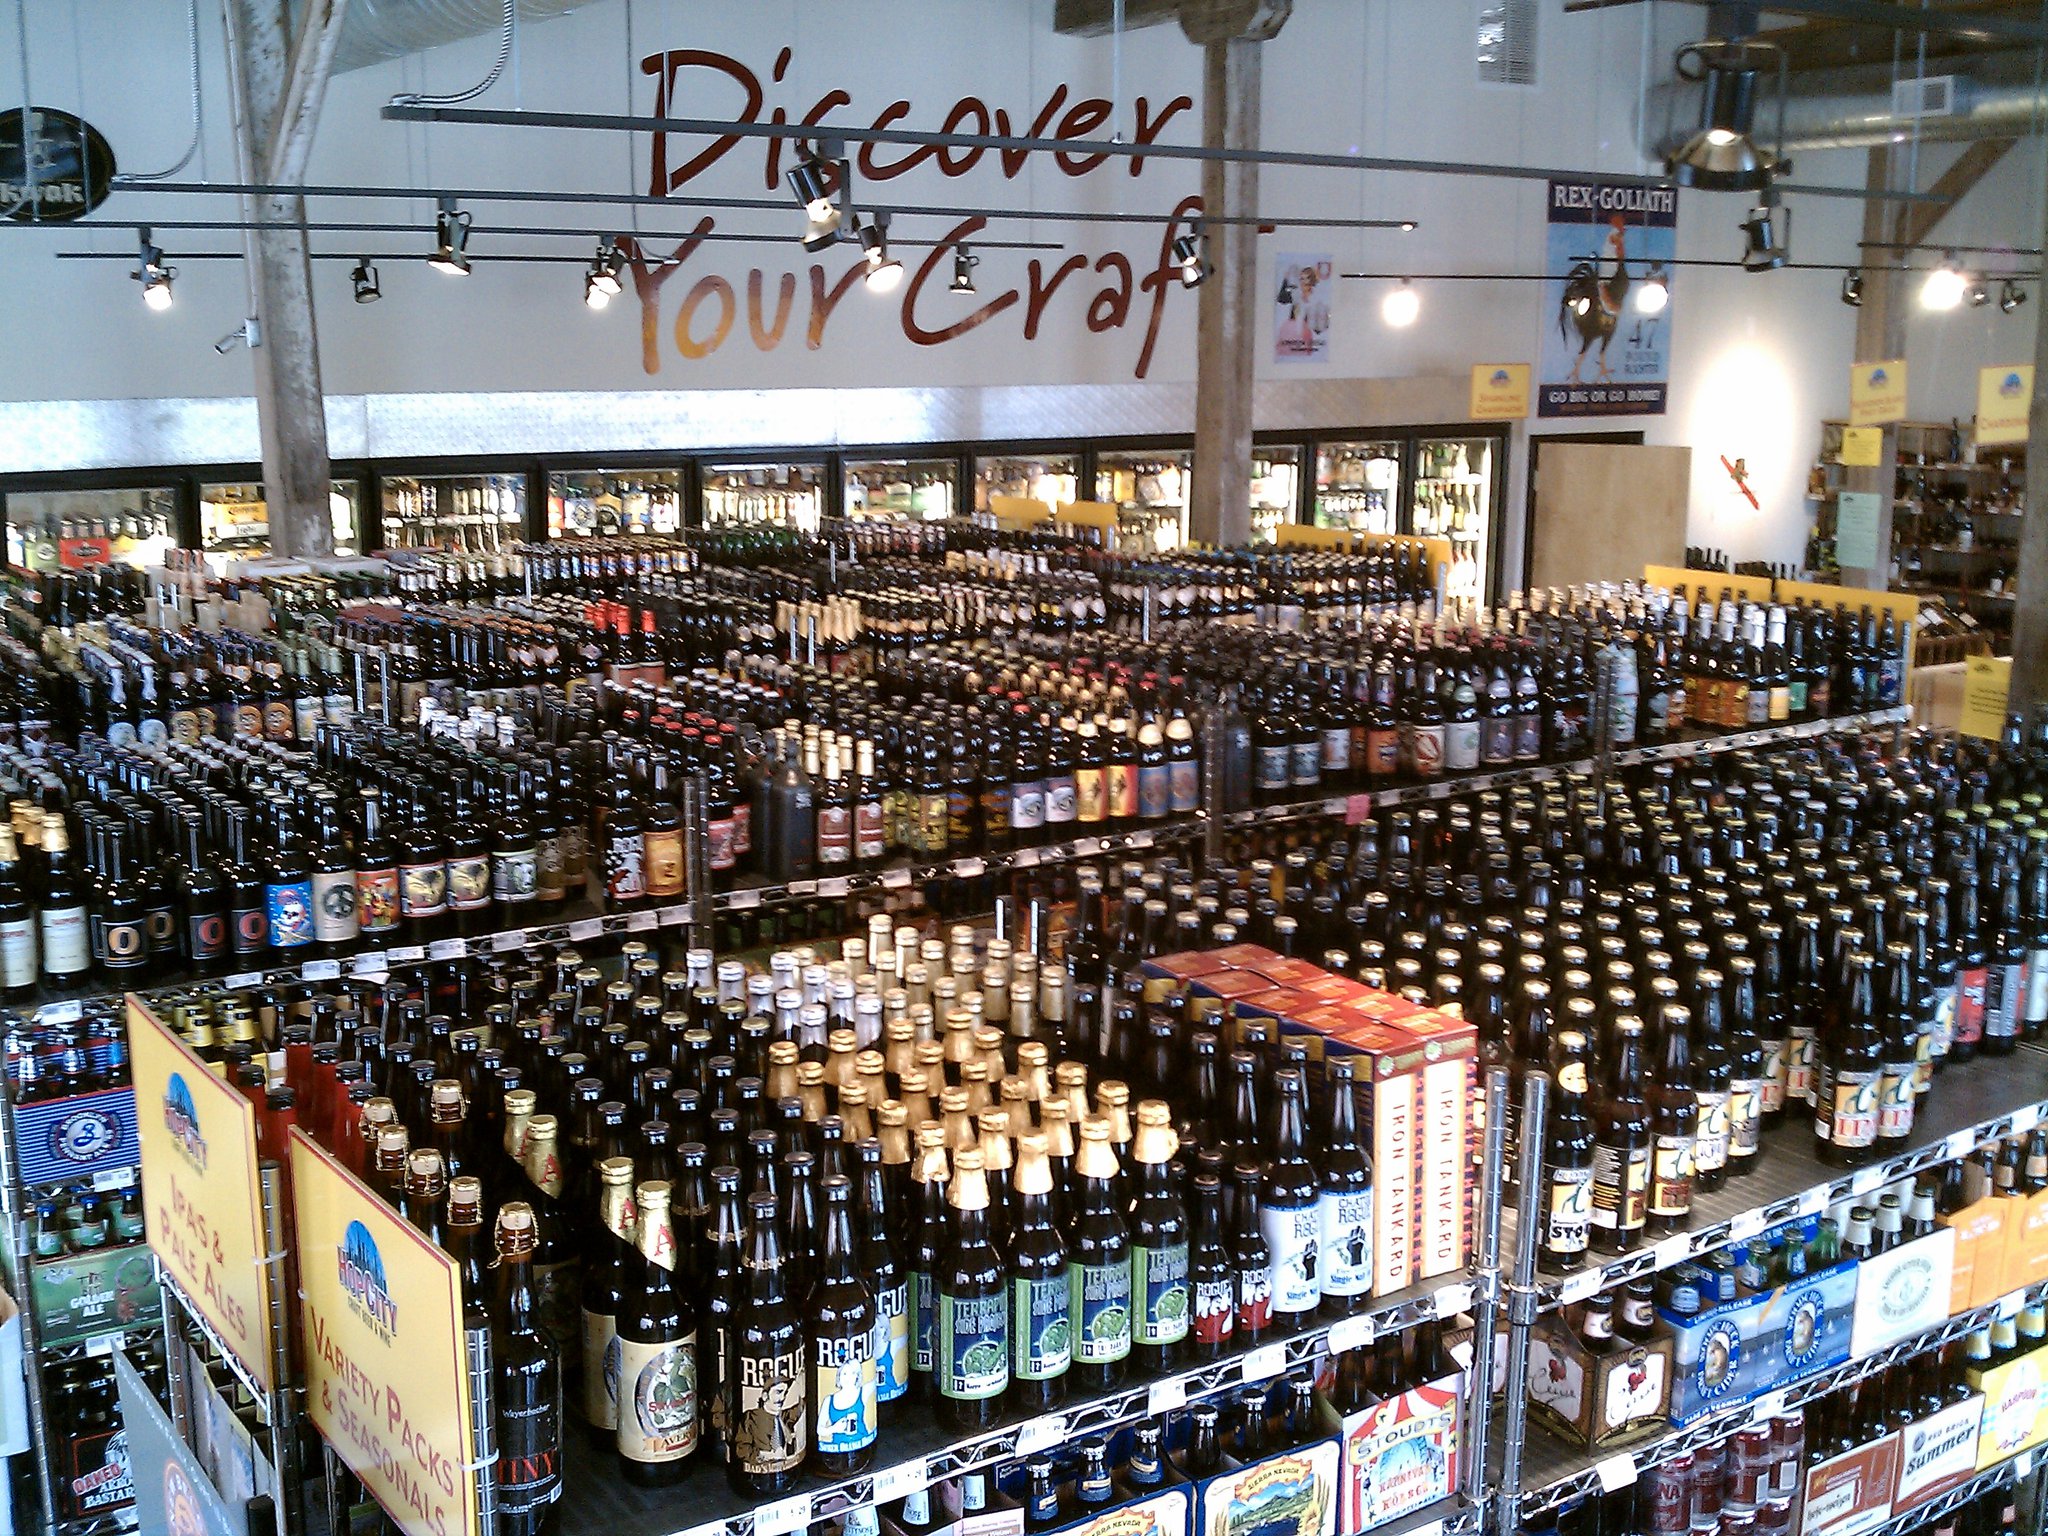 An above shot of the aisles filled with bottles of beer and wine inside the krog street market location of Hop City Craft Beer and Wine in Atlanta, GA